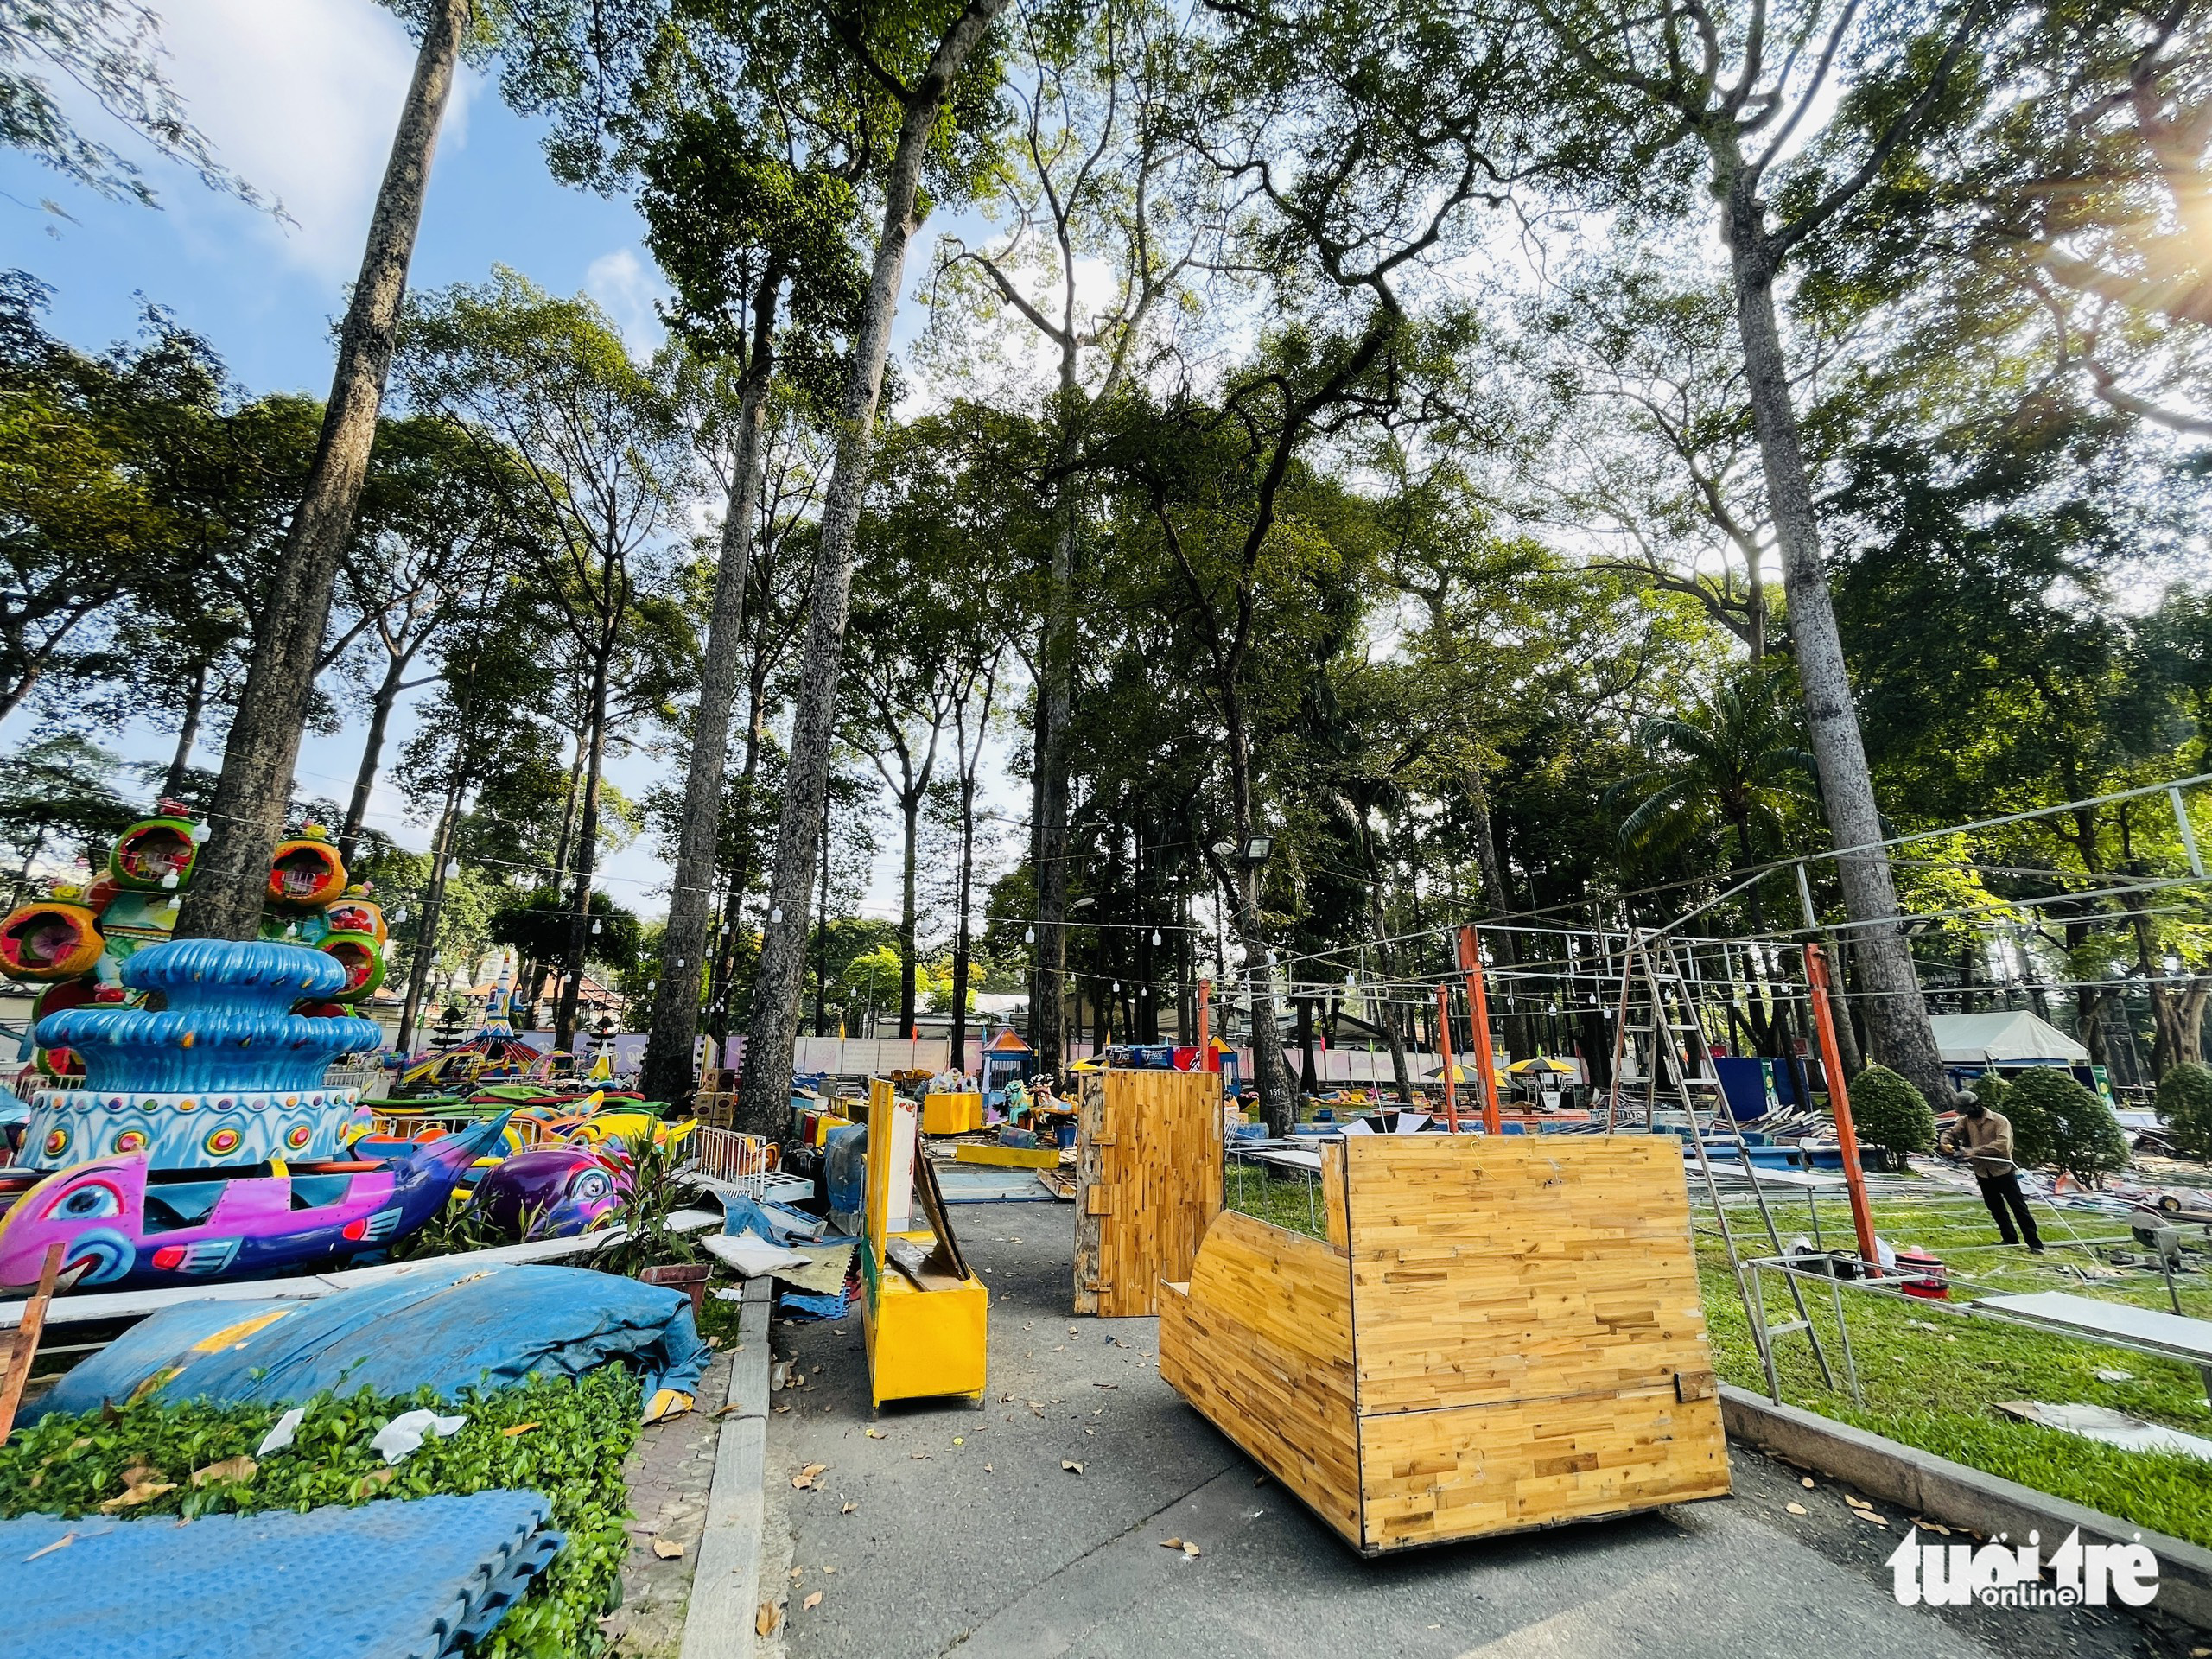 Construction work is being finished at the 2022 Tet Flower Festival at Tao Dan Park in Ho Chi Minh City, January 23, 2022. Photo: Le Phan / Tuoi Tre